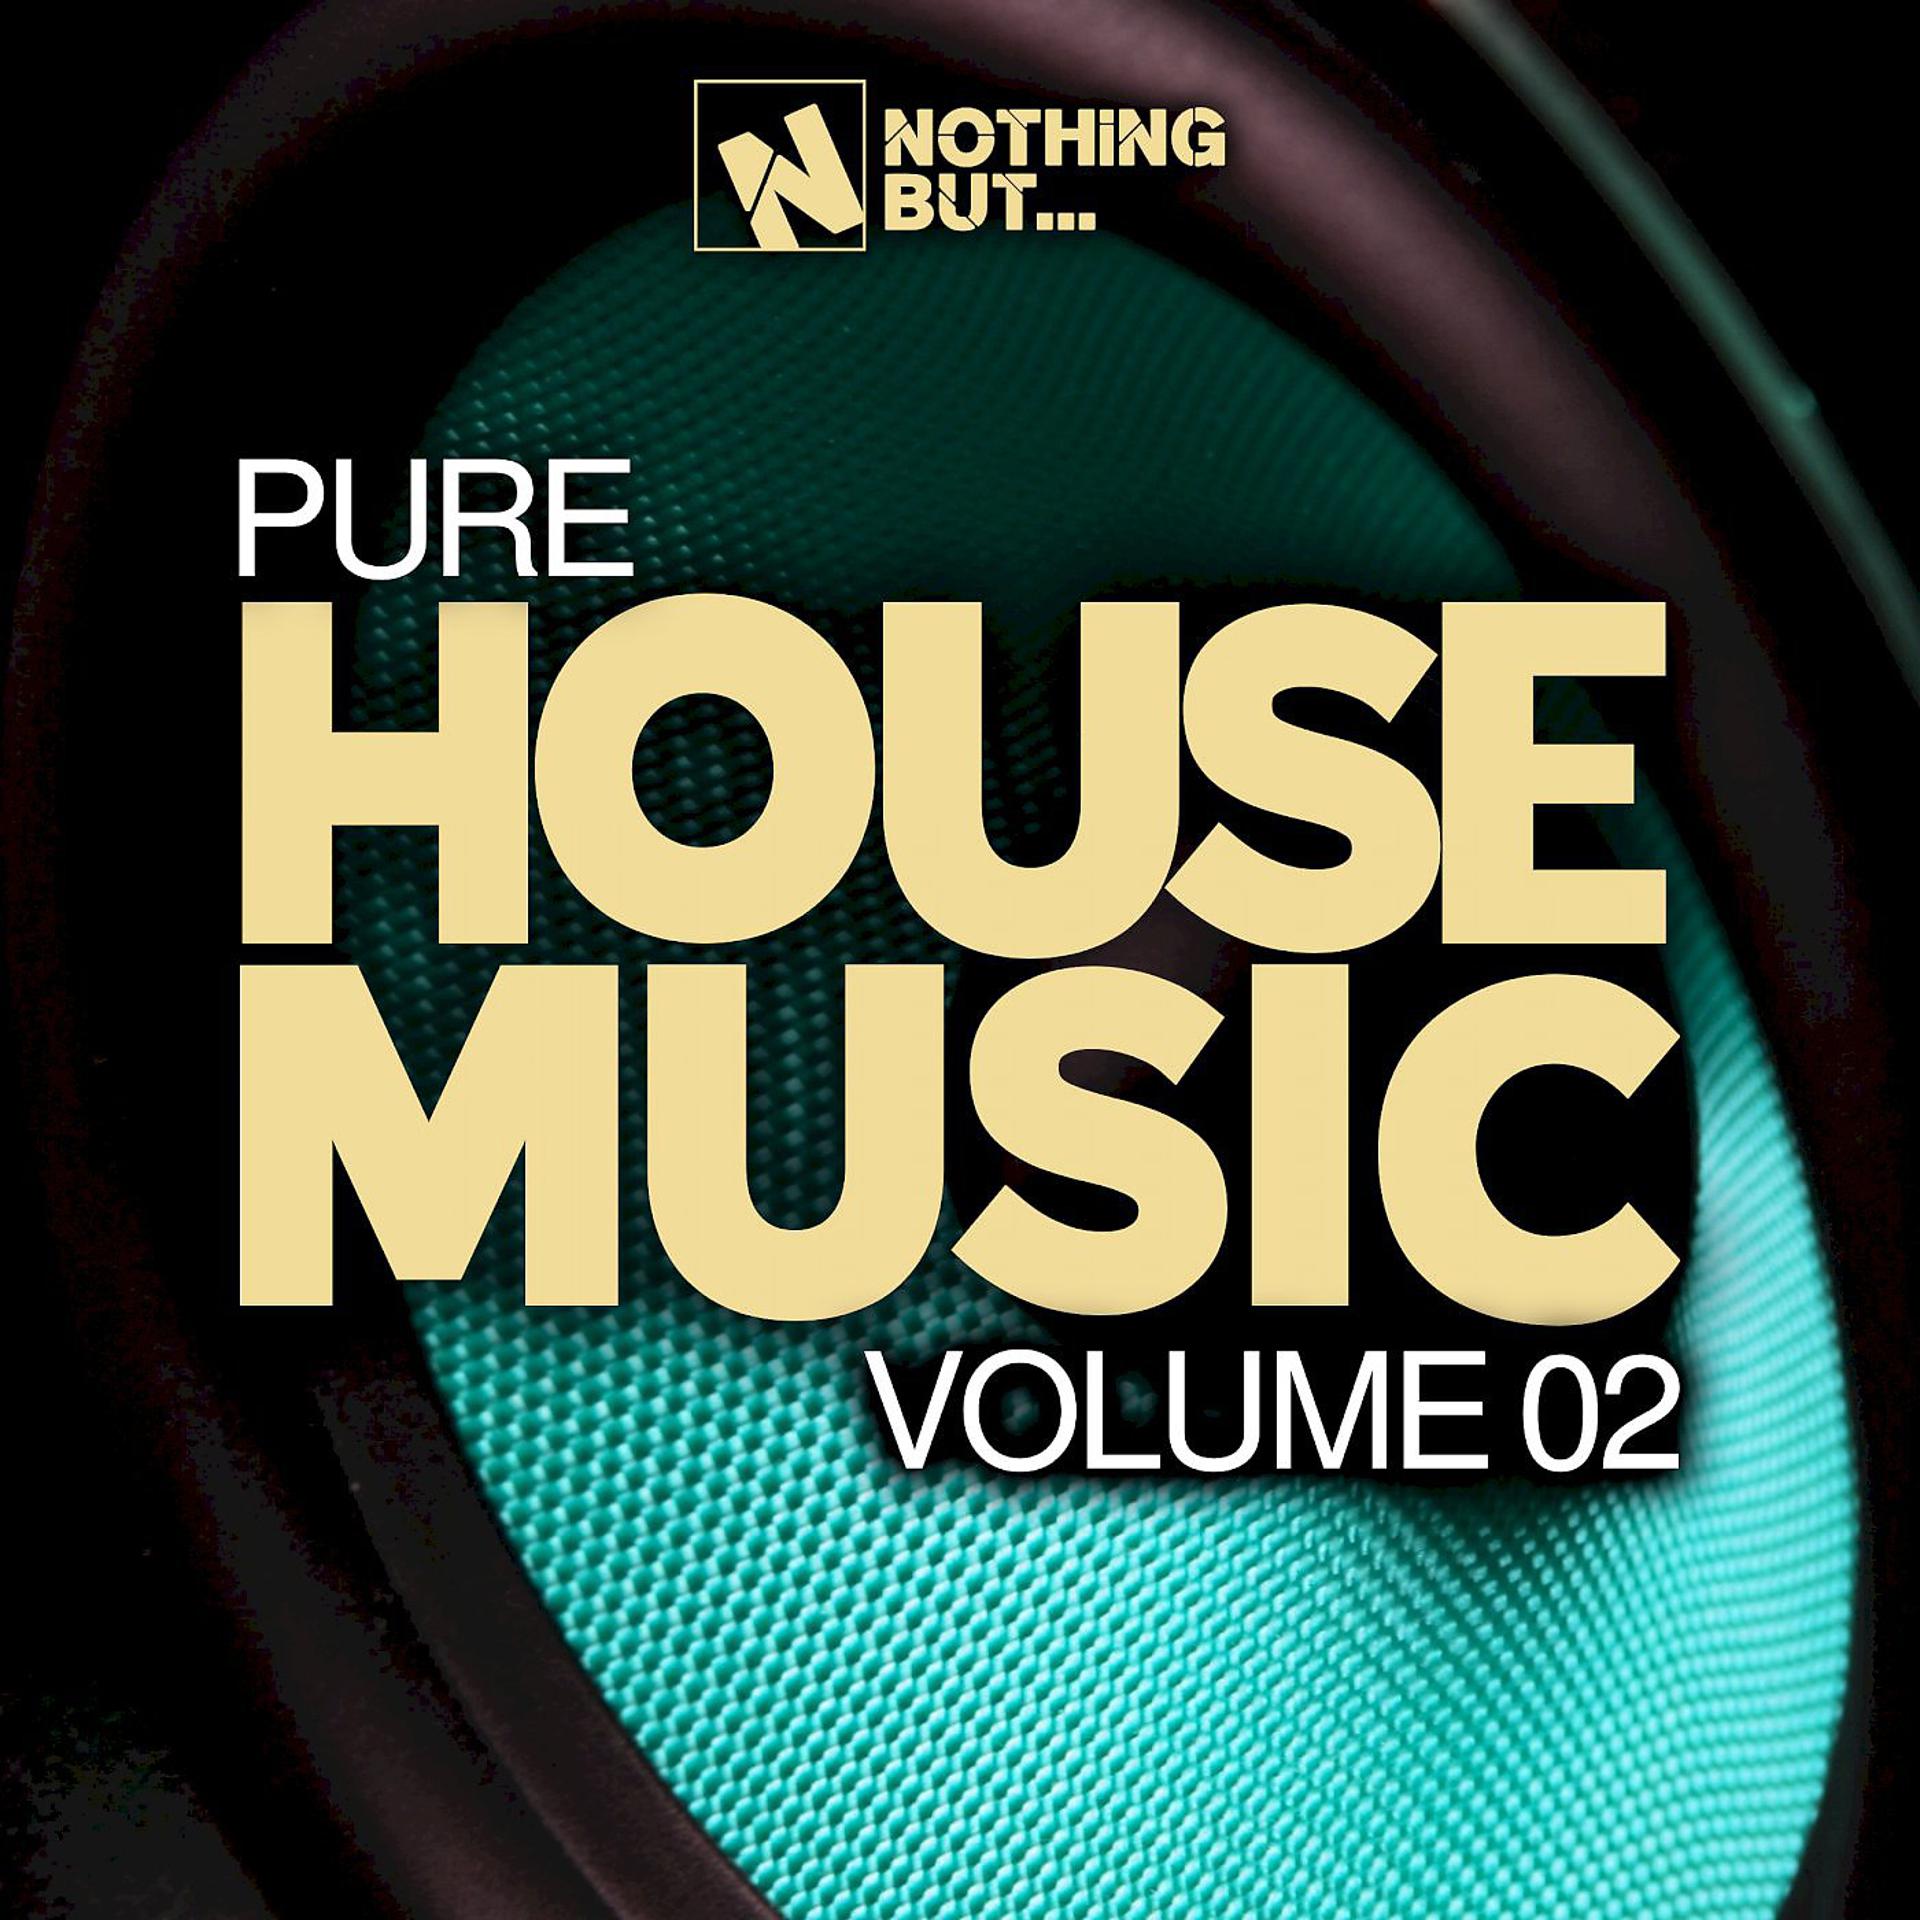 Постер альбома Nothing But... Pure House Music, Vol. 02